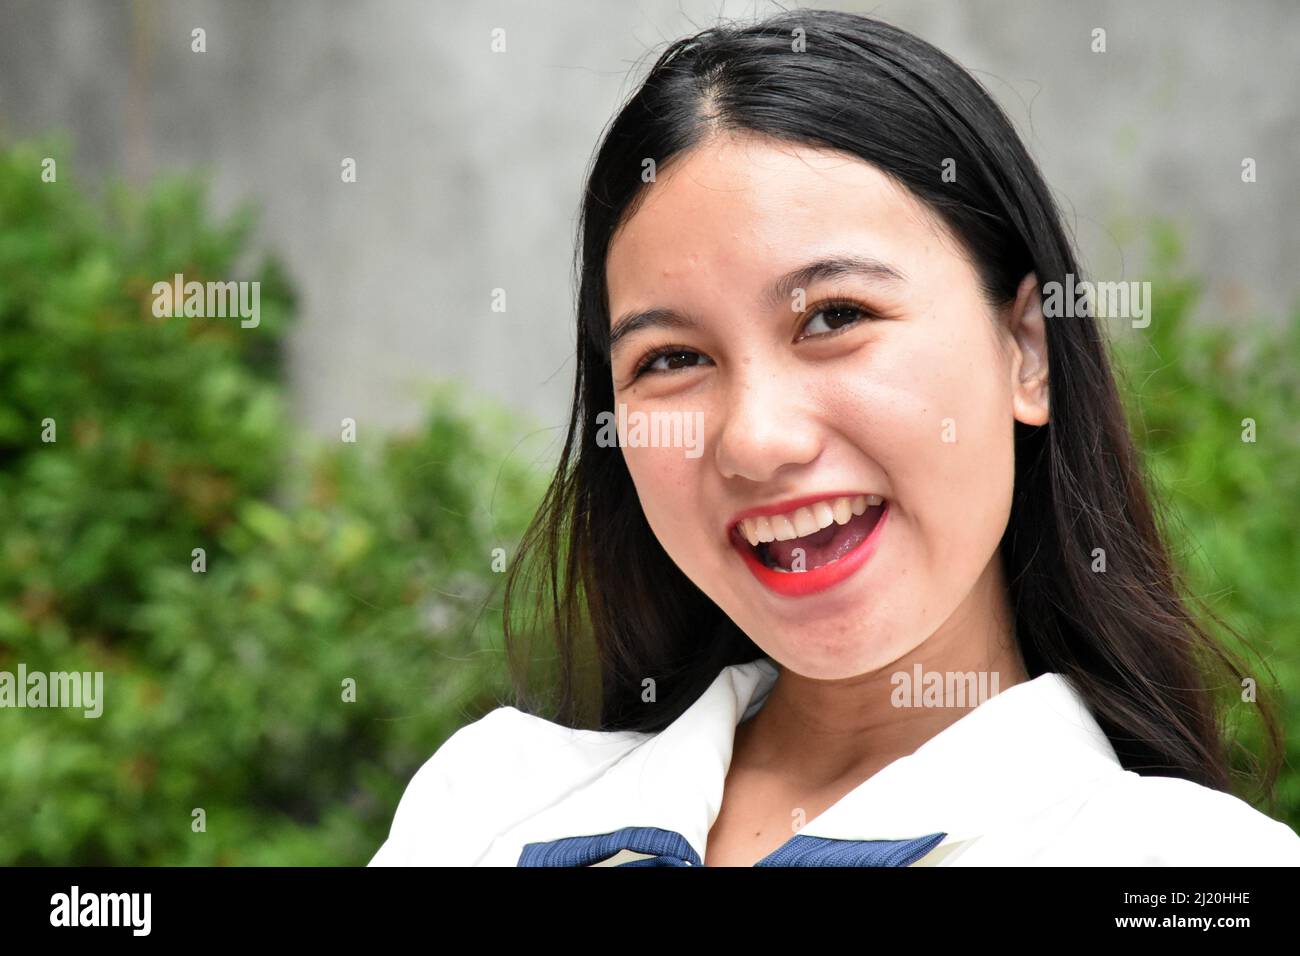 A Happy Asian Woman Laughing Stock Photo